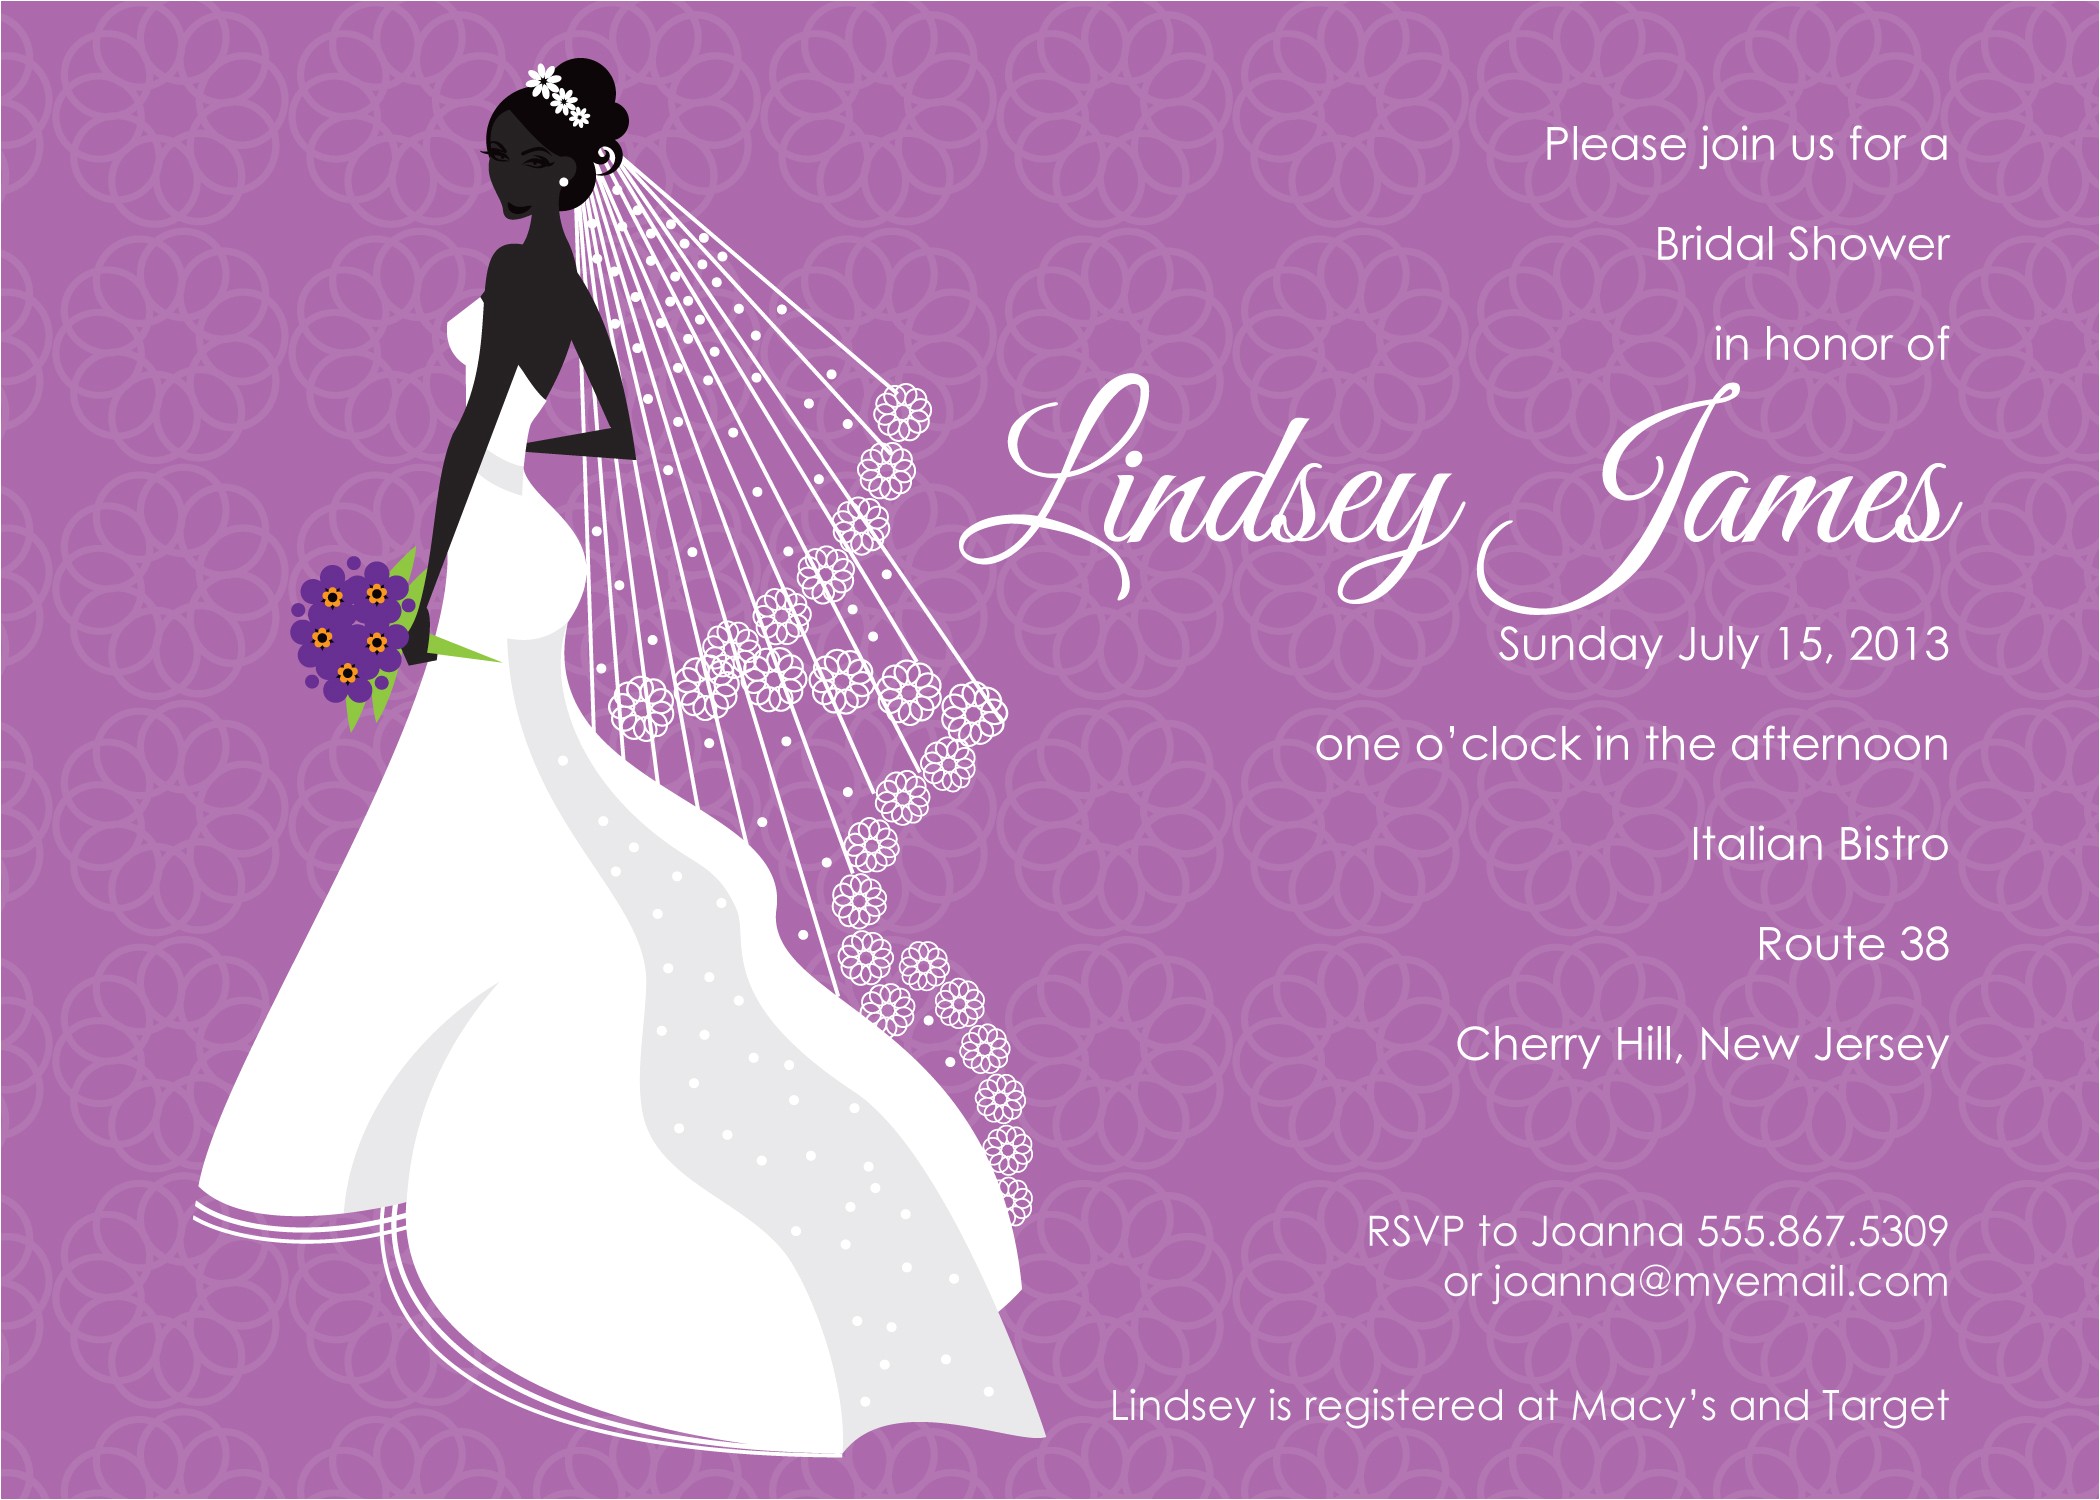 Bridal Shower Quotes for Invitations Quotes for Bridal Shower Invitations Quotesgram